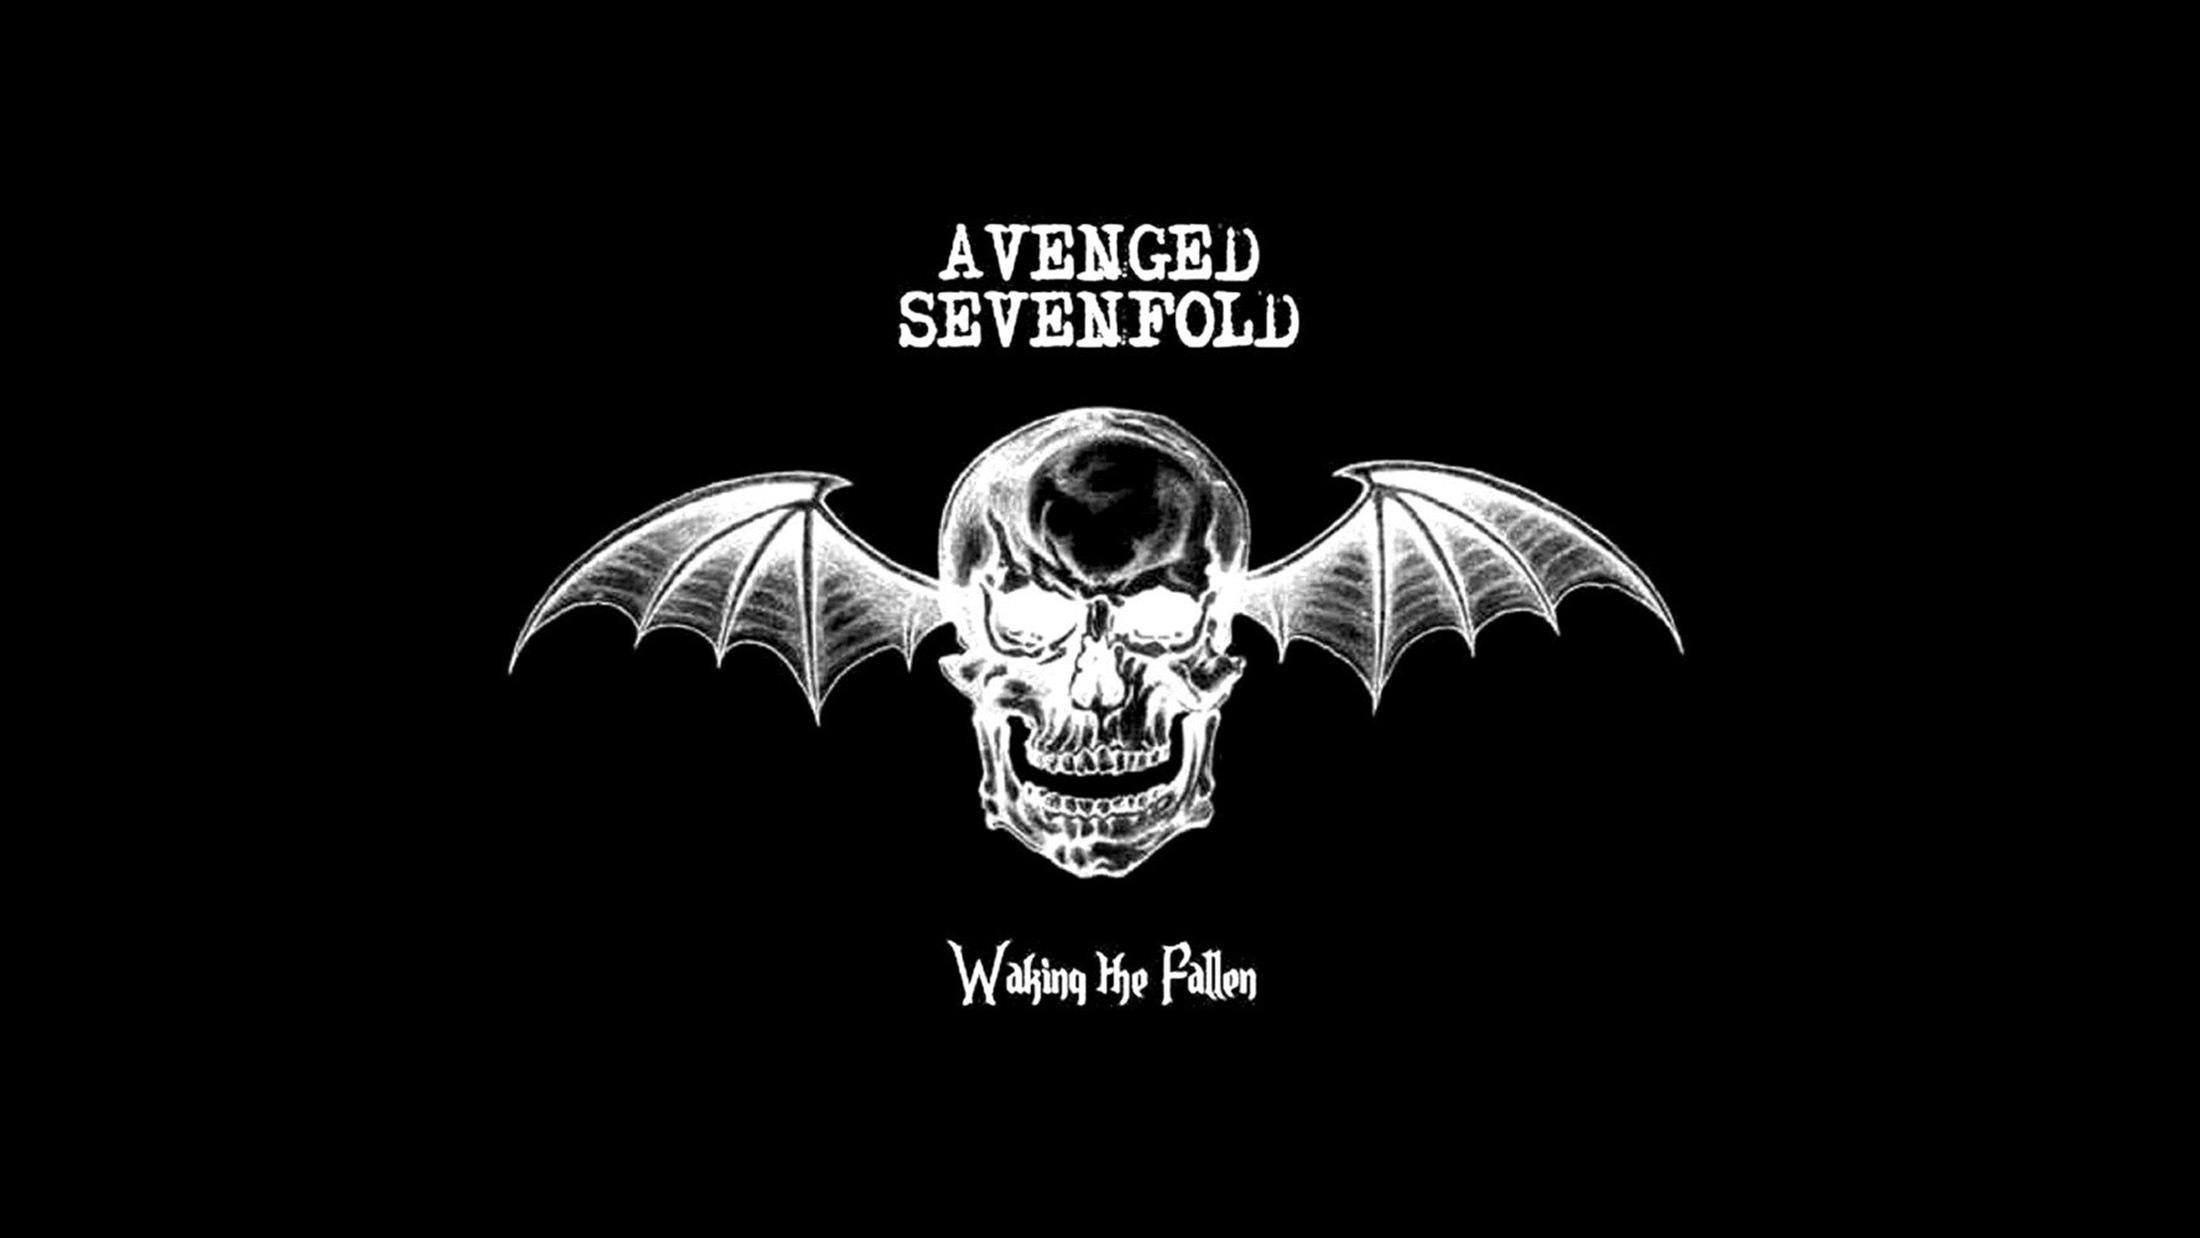 The album that brought Avenged Sevenfold into the public consciousness is a masterly melting pot of styles, especially when you compare it to the more streamlined offerings that would follow (and bring greater acclaim.) If you’re in doubt about its genre-mashing credentials, ask yourself: how many other records do you know that are comparable to both NOFX and Metallica?